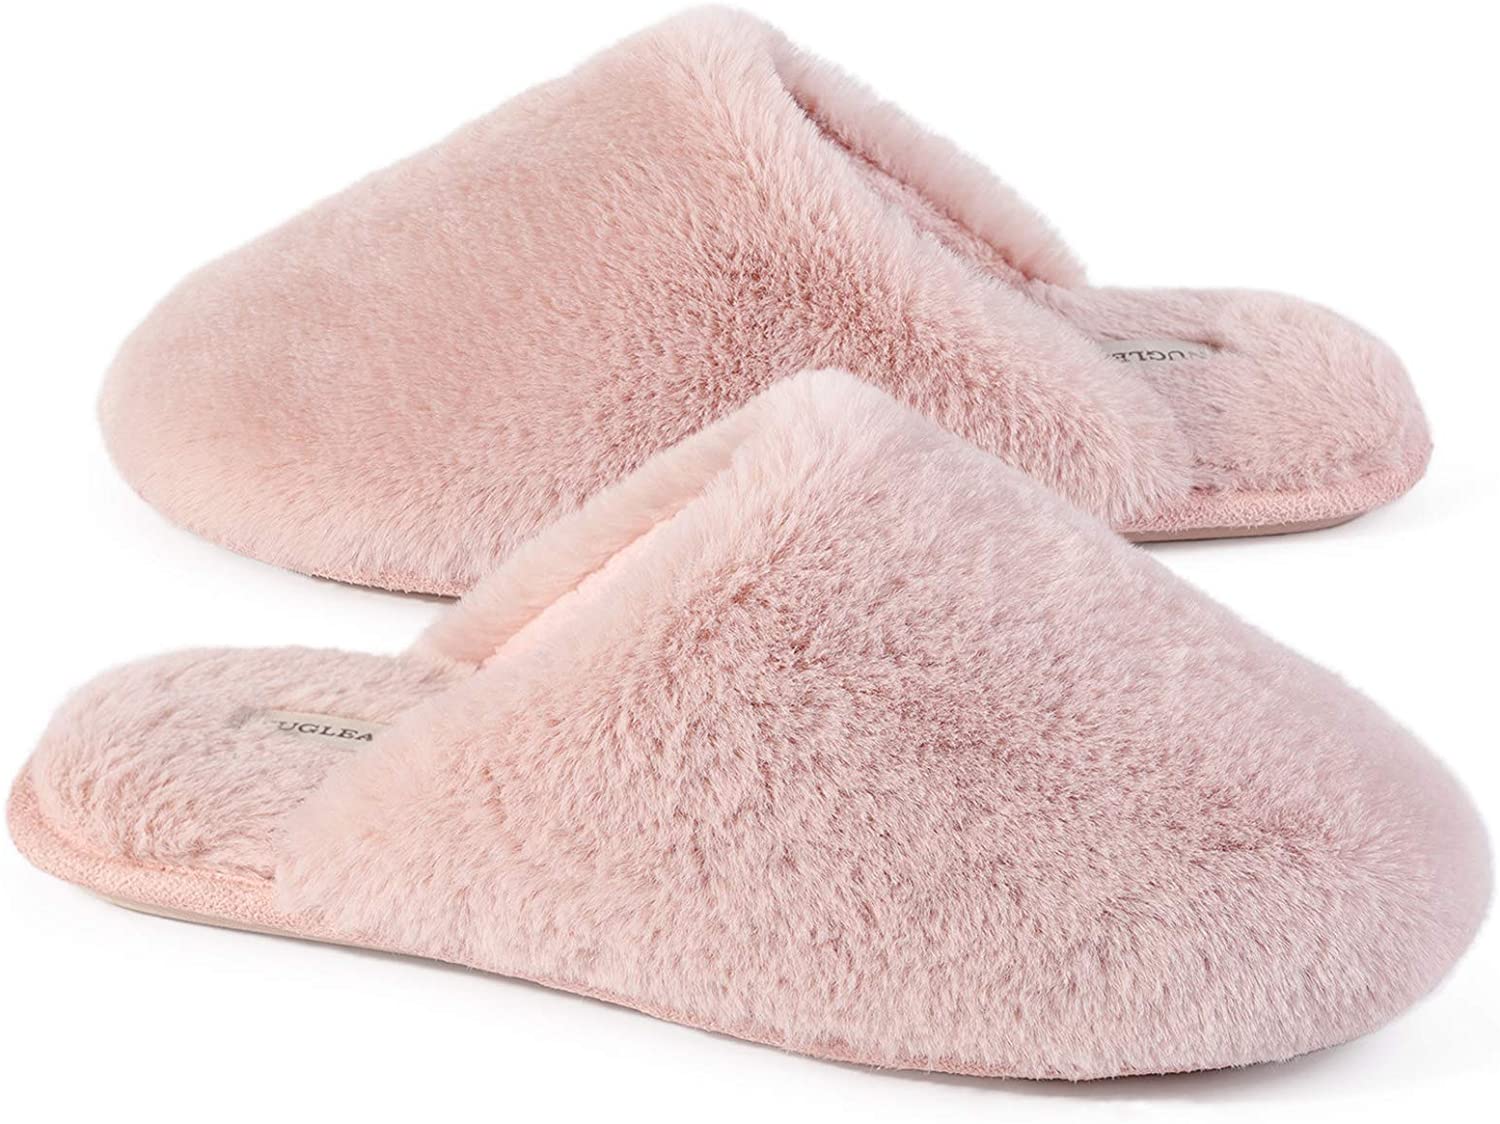 Snug Leaves Ladies' Fluffy Memory Foam Slip On Slippers with Cozy Faux Fur Lined House Shoes 